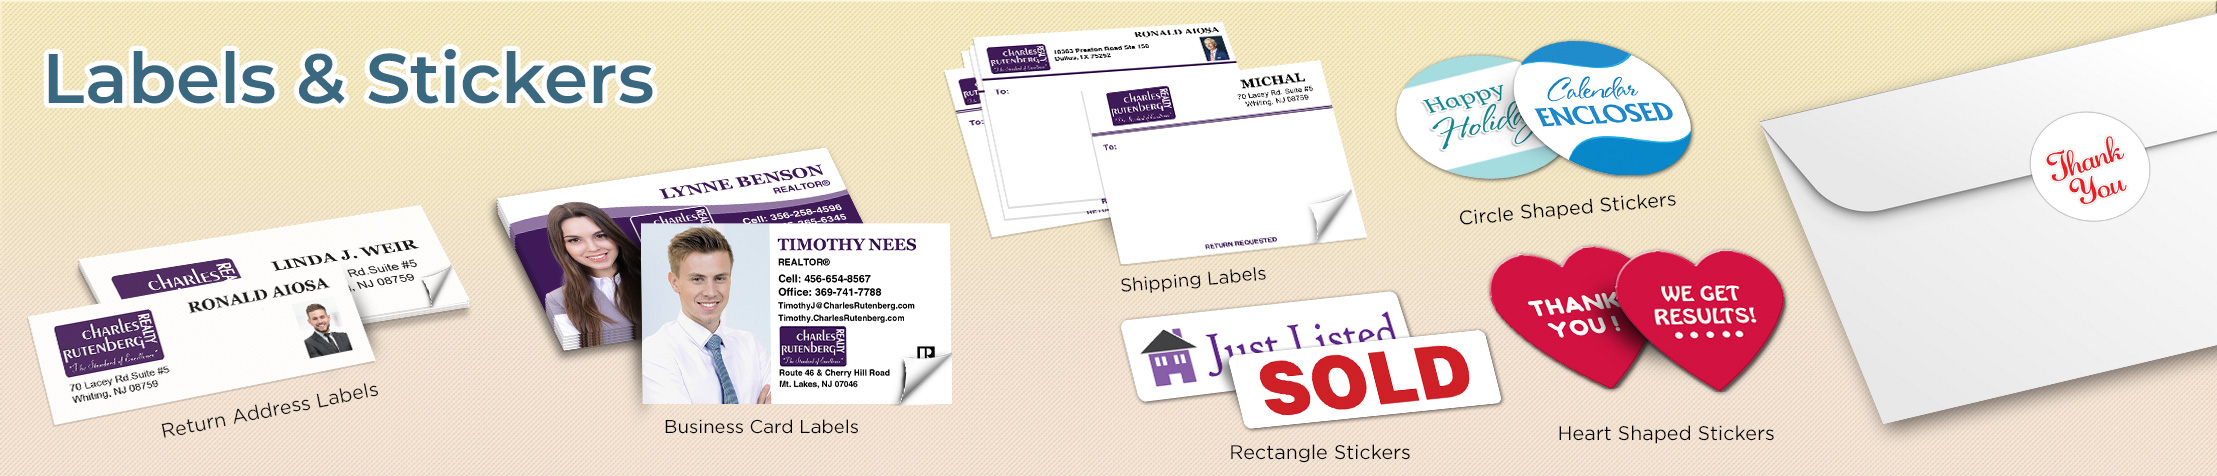 Charles Rutenberg Realty Real Estate Labels and Stickers - Charles Rutenberg Realty  business card labels, return address labels, shipping labels, and assorted stickers | BestPrintBuy.com